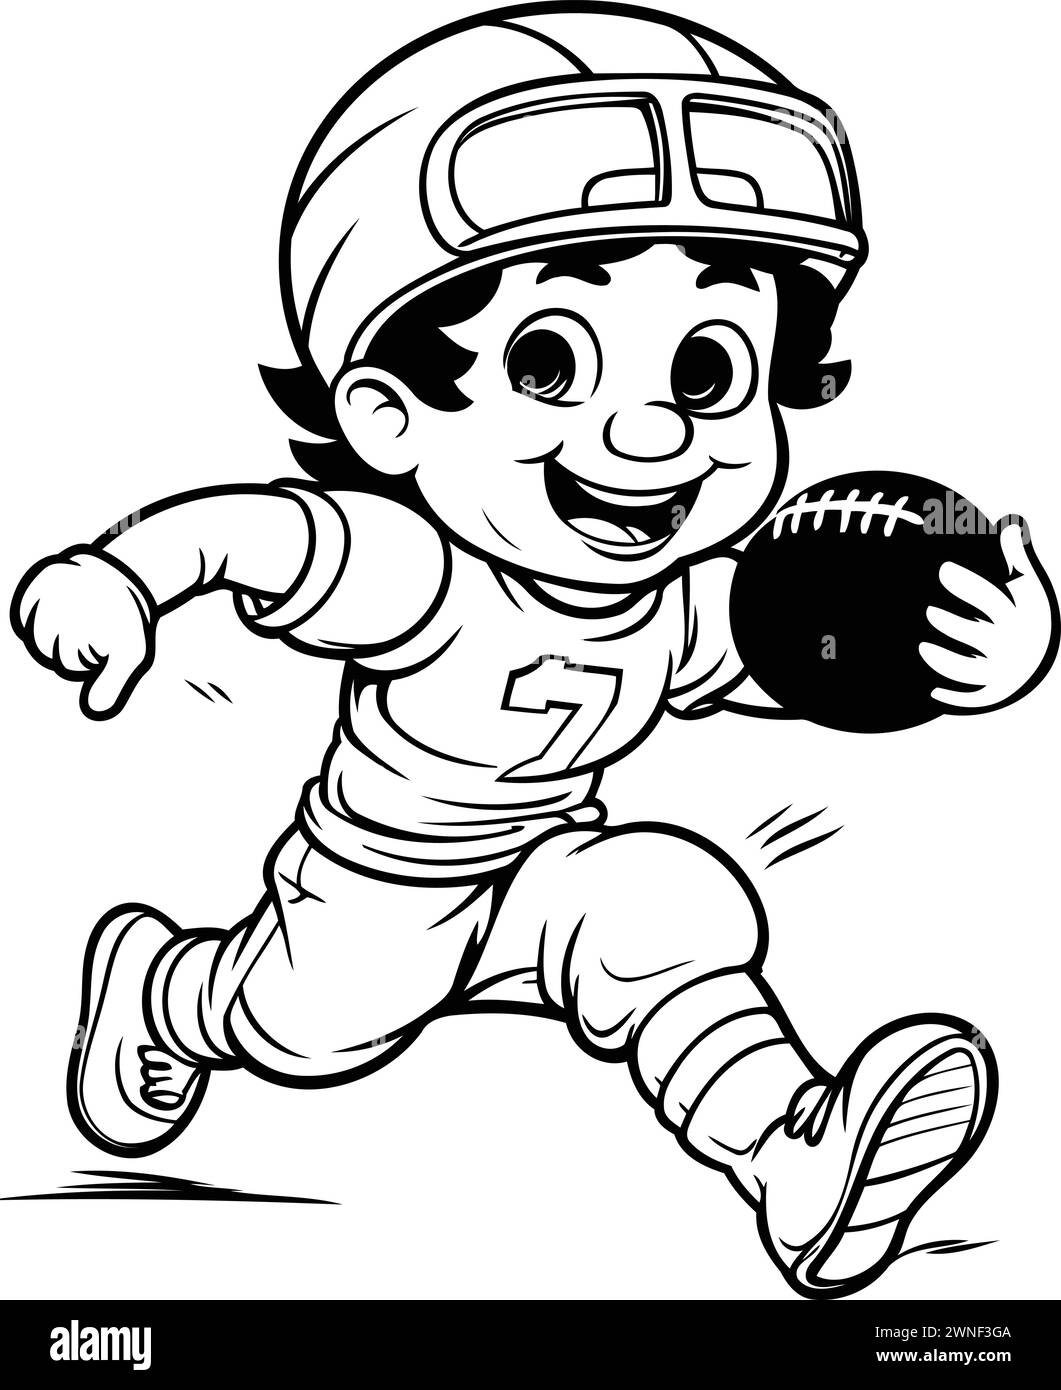 Illustration of a Little American Football Player Running with Ball - Coloring Book Stock Vector